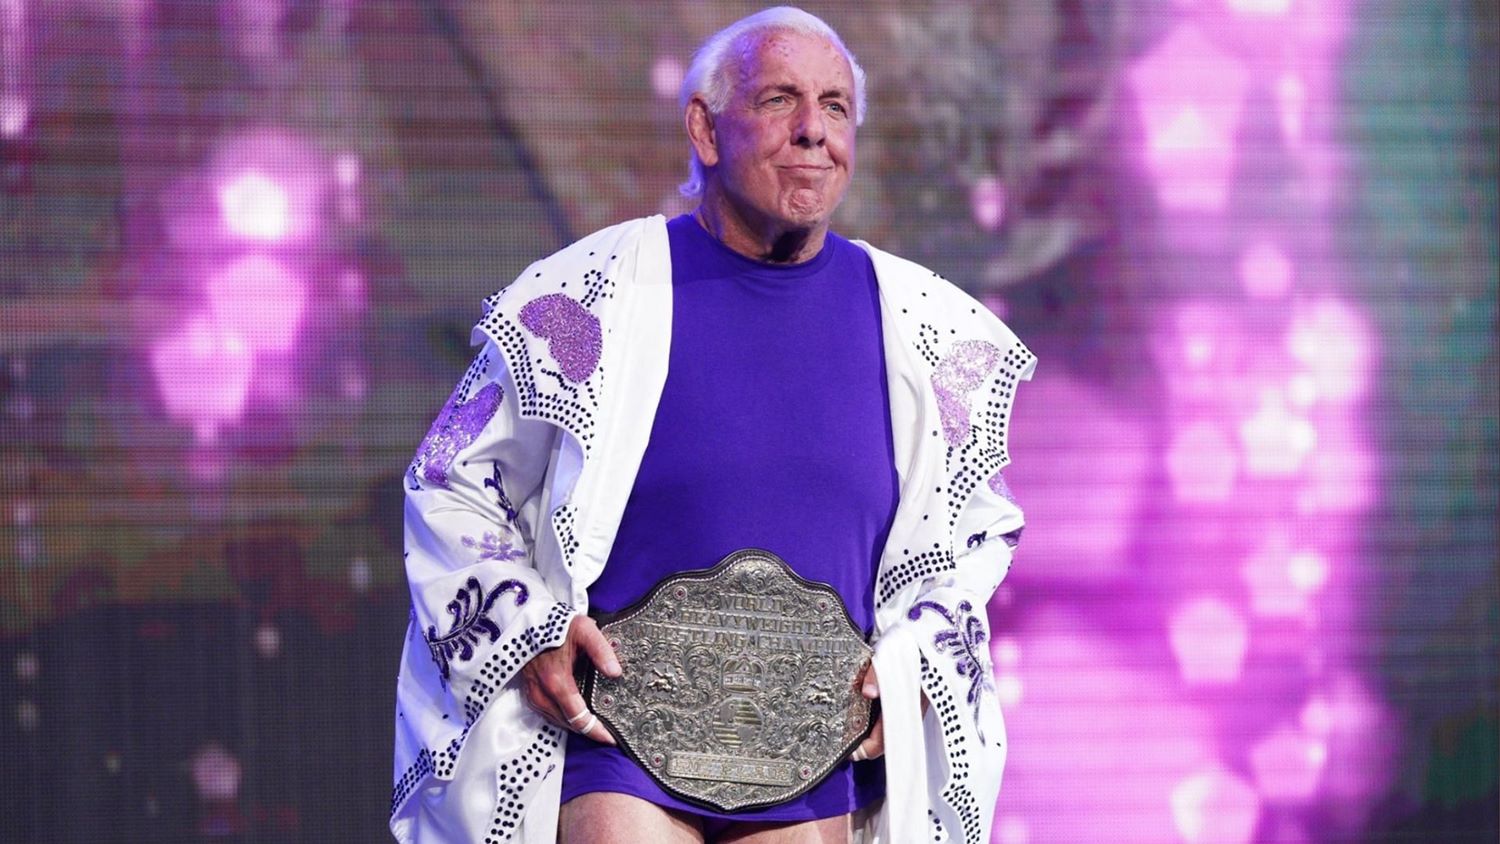 How To Watch Ric Flair’s Last Match